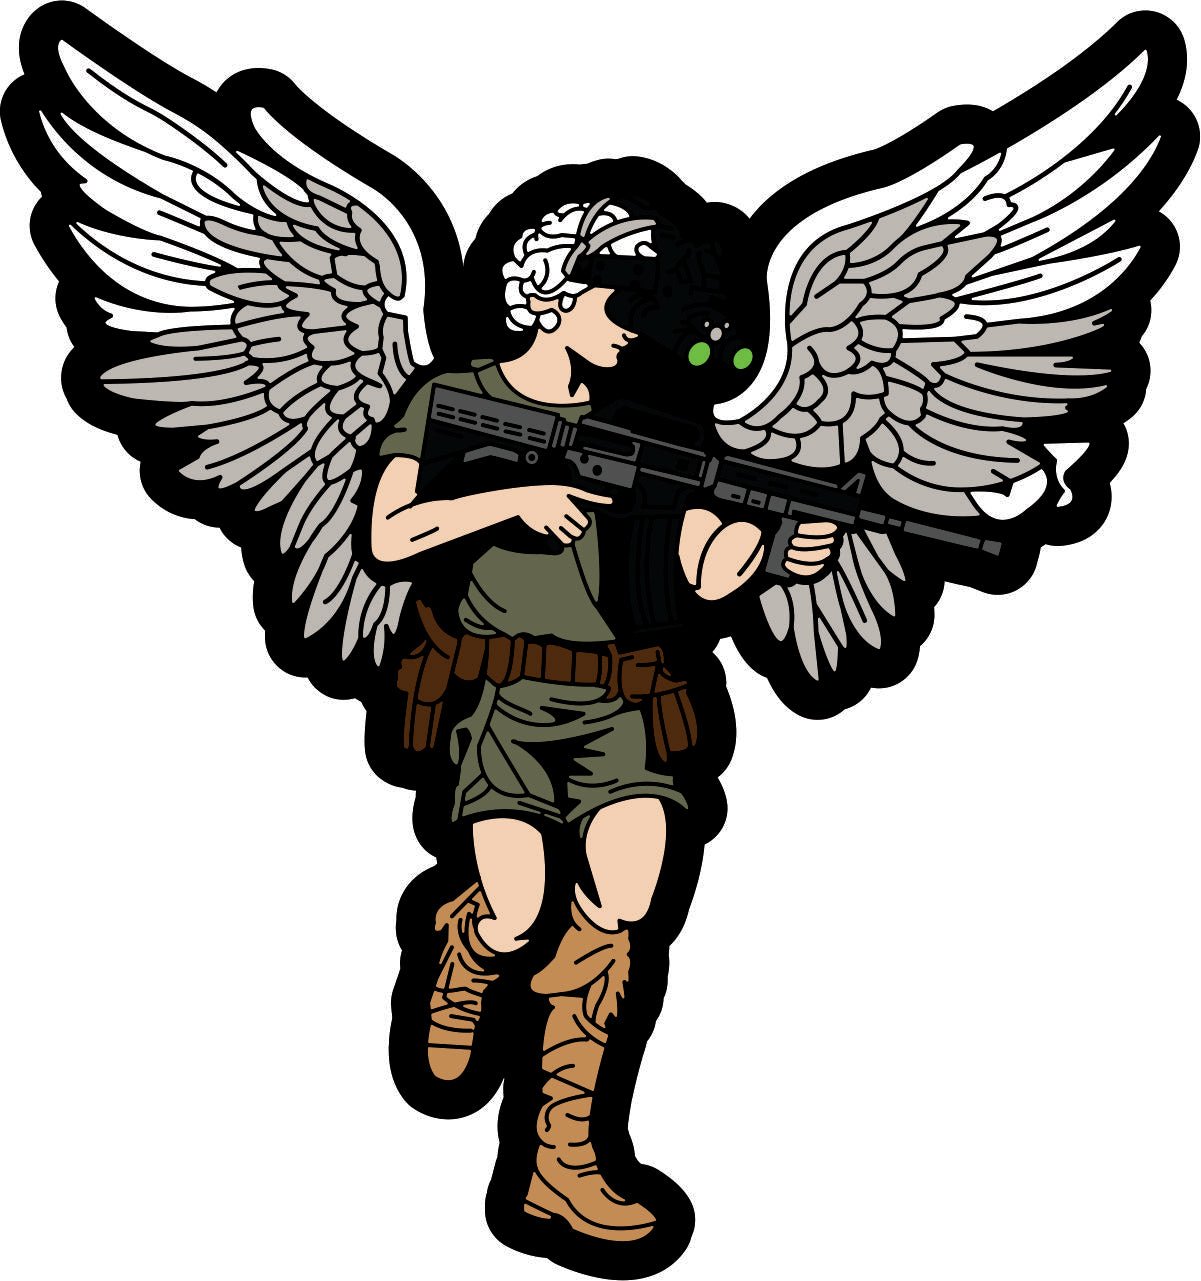 Tactical Cupid Cherub with AR-15 and Night Vision goggles  - 4" inch sticker